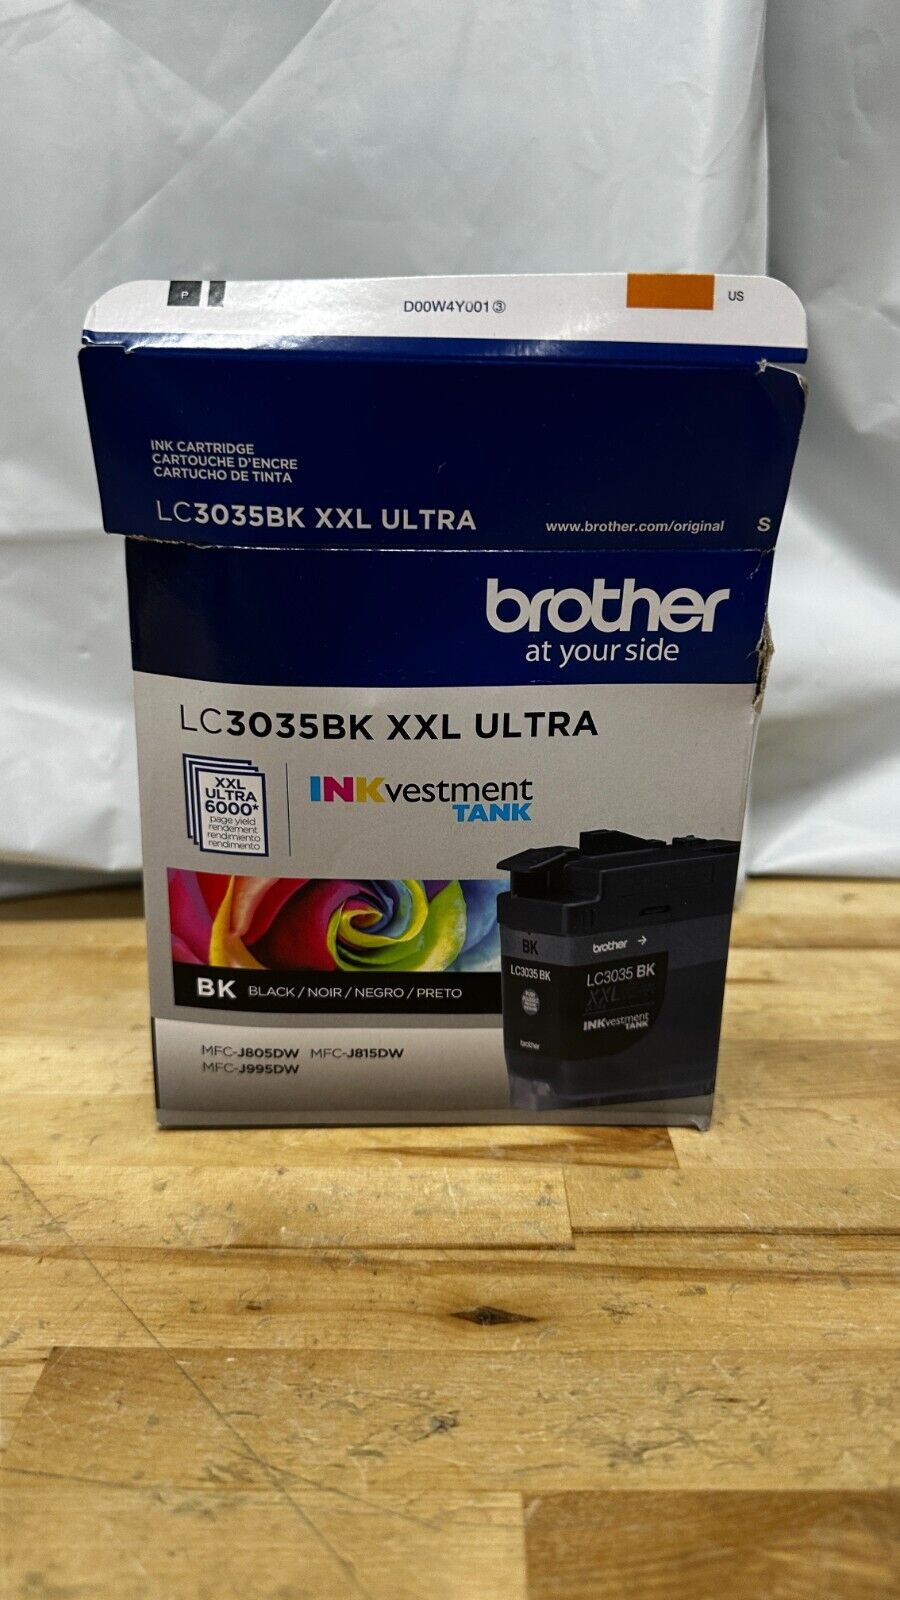 Brother LC3035BK XXL Ultra 6000 INKvestment Tank Ink Cartridge for MFC-J805DW